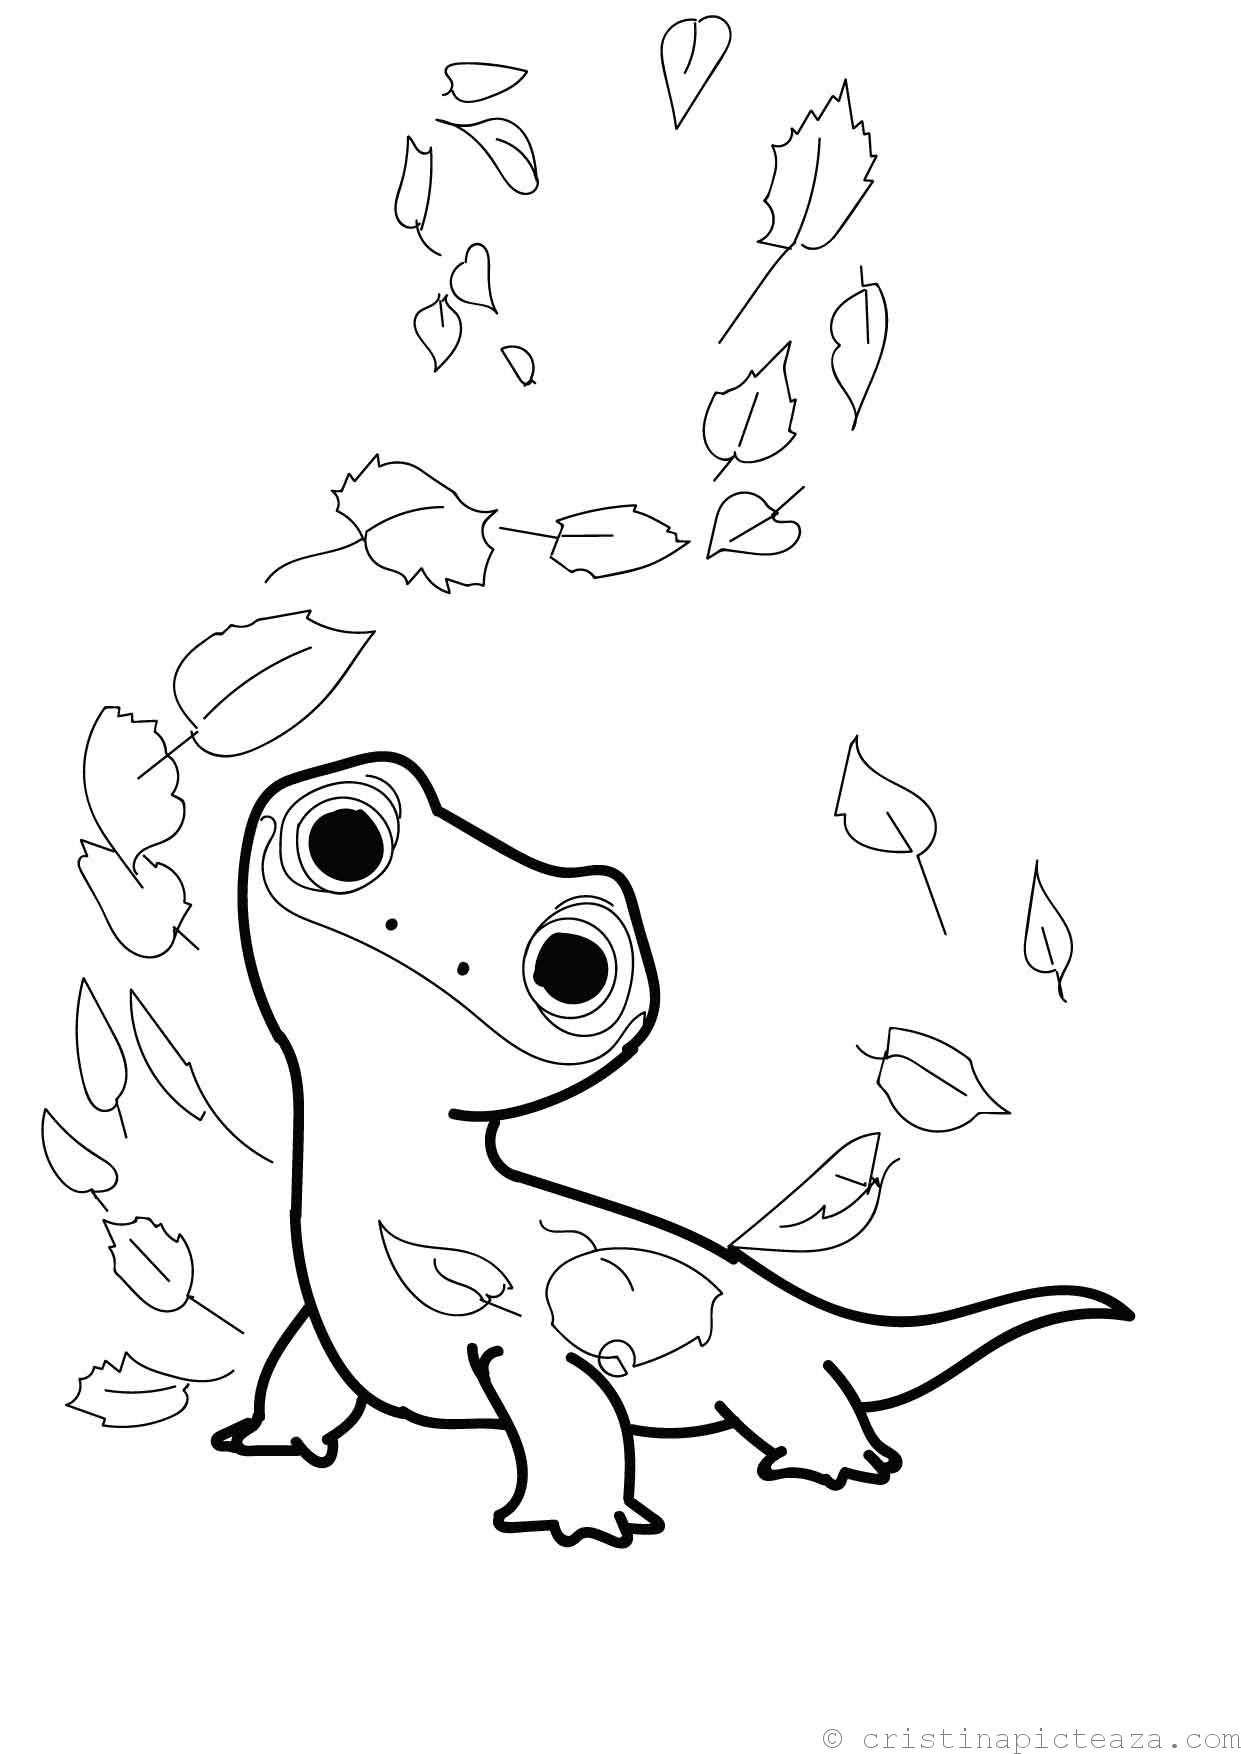 Bruni The Salamander Coloring Pages – Cristina is Painting